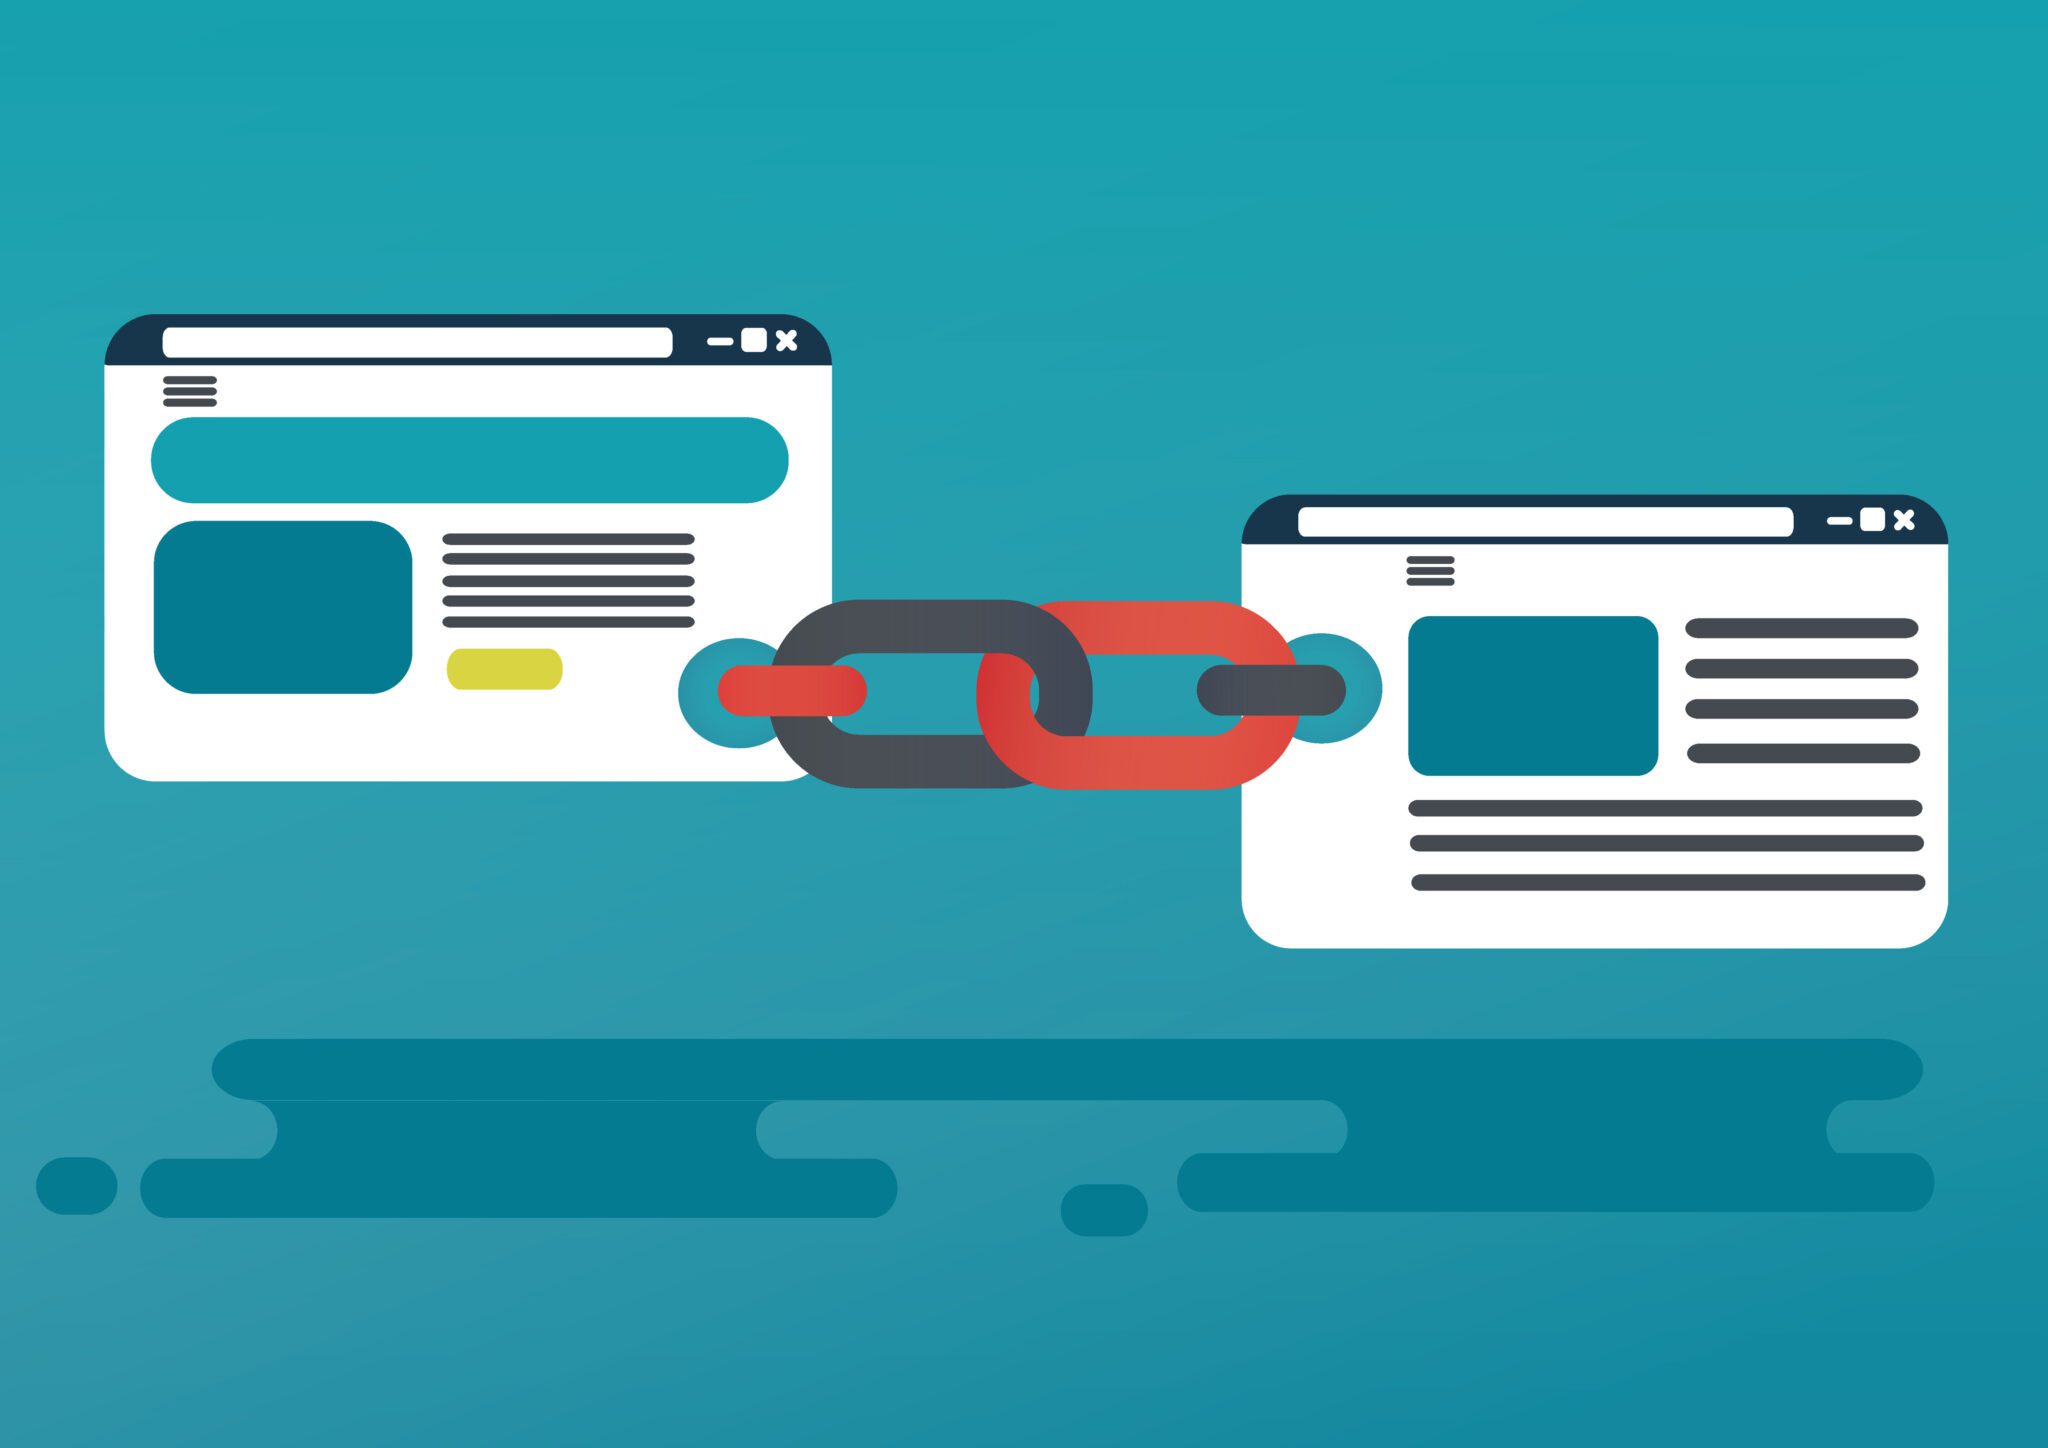 Link Building - What Is It? - Outrank Ltd